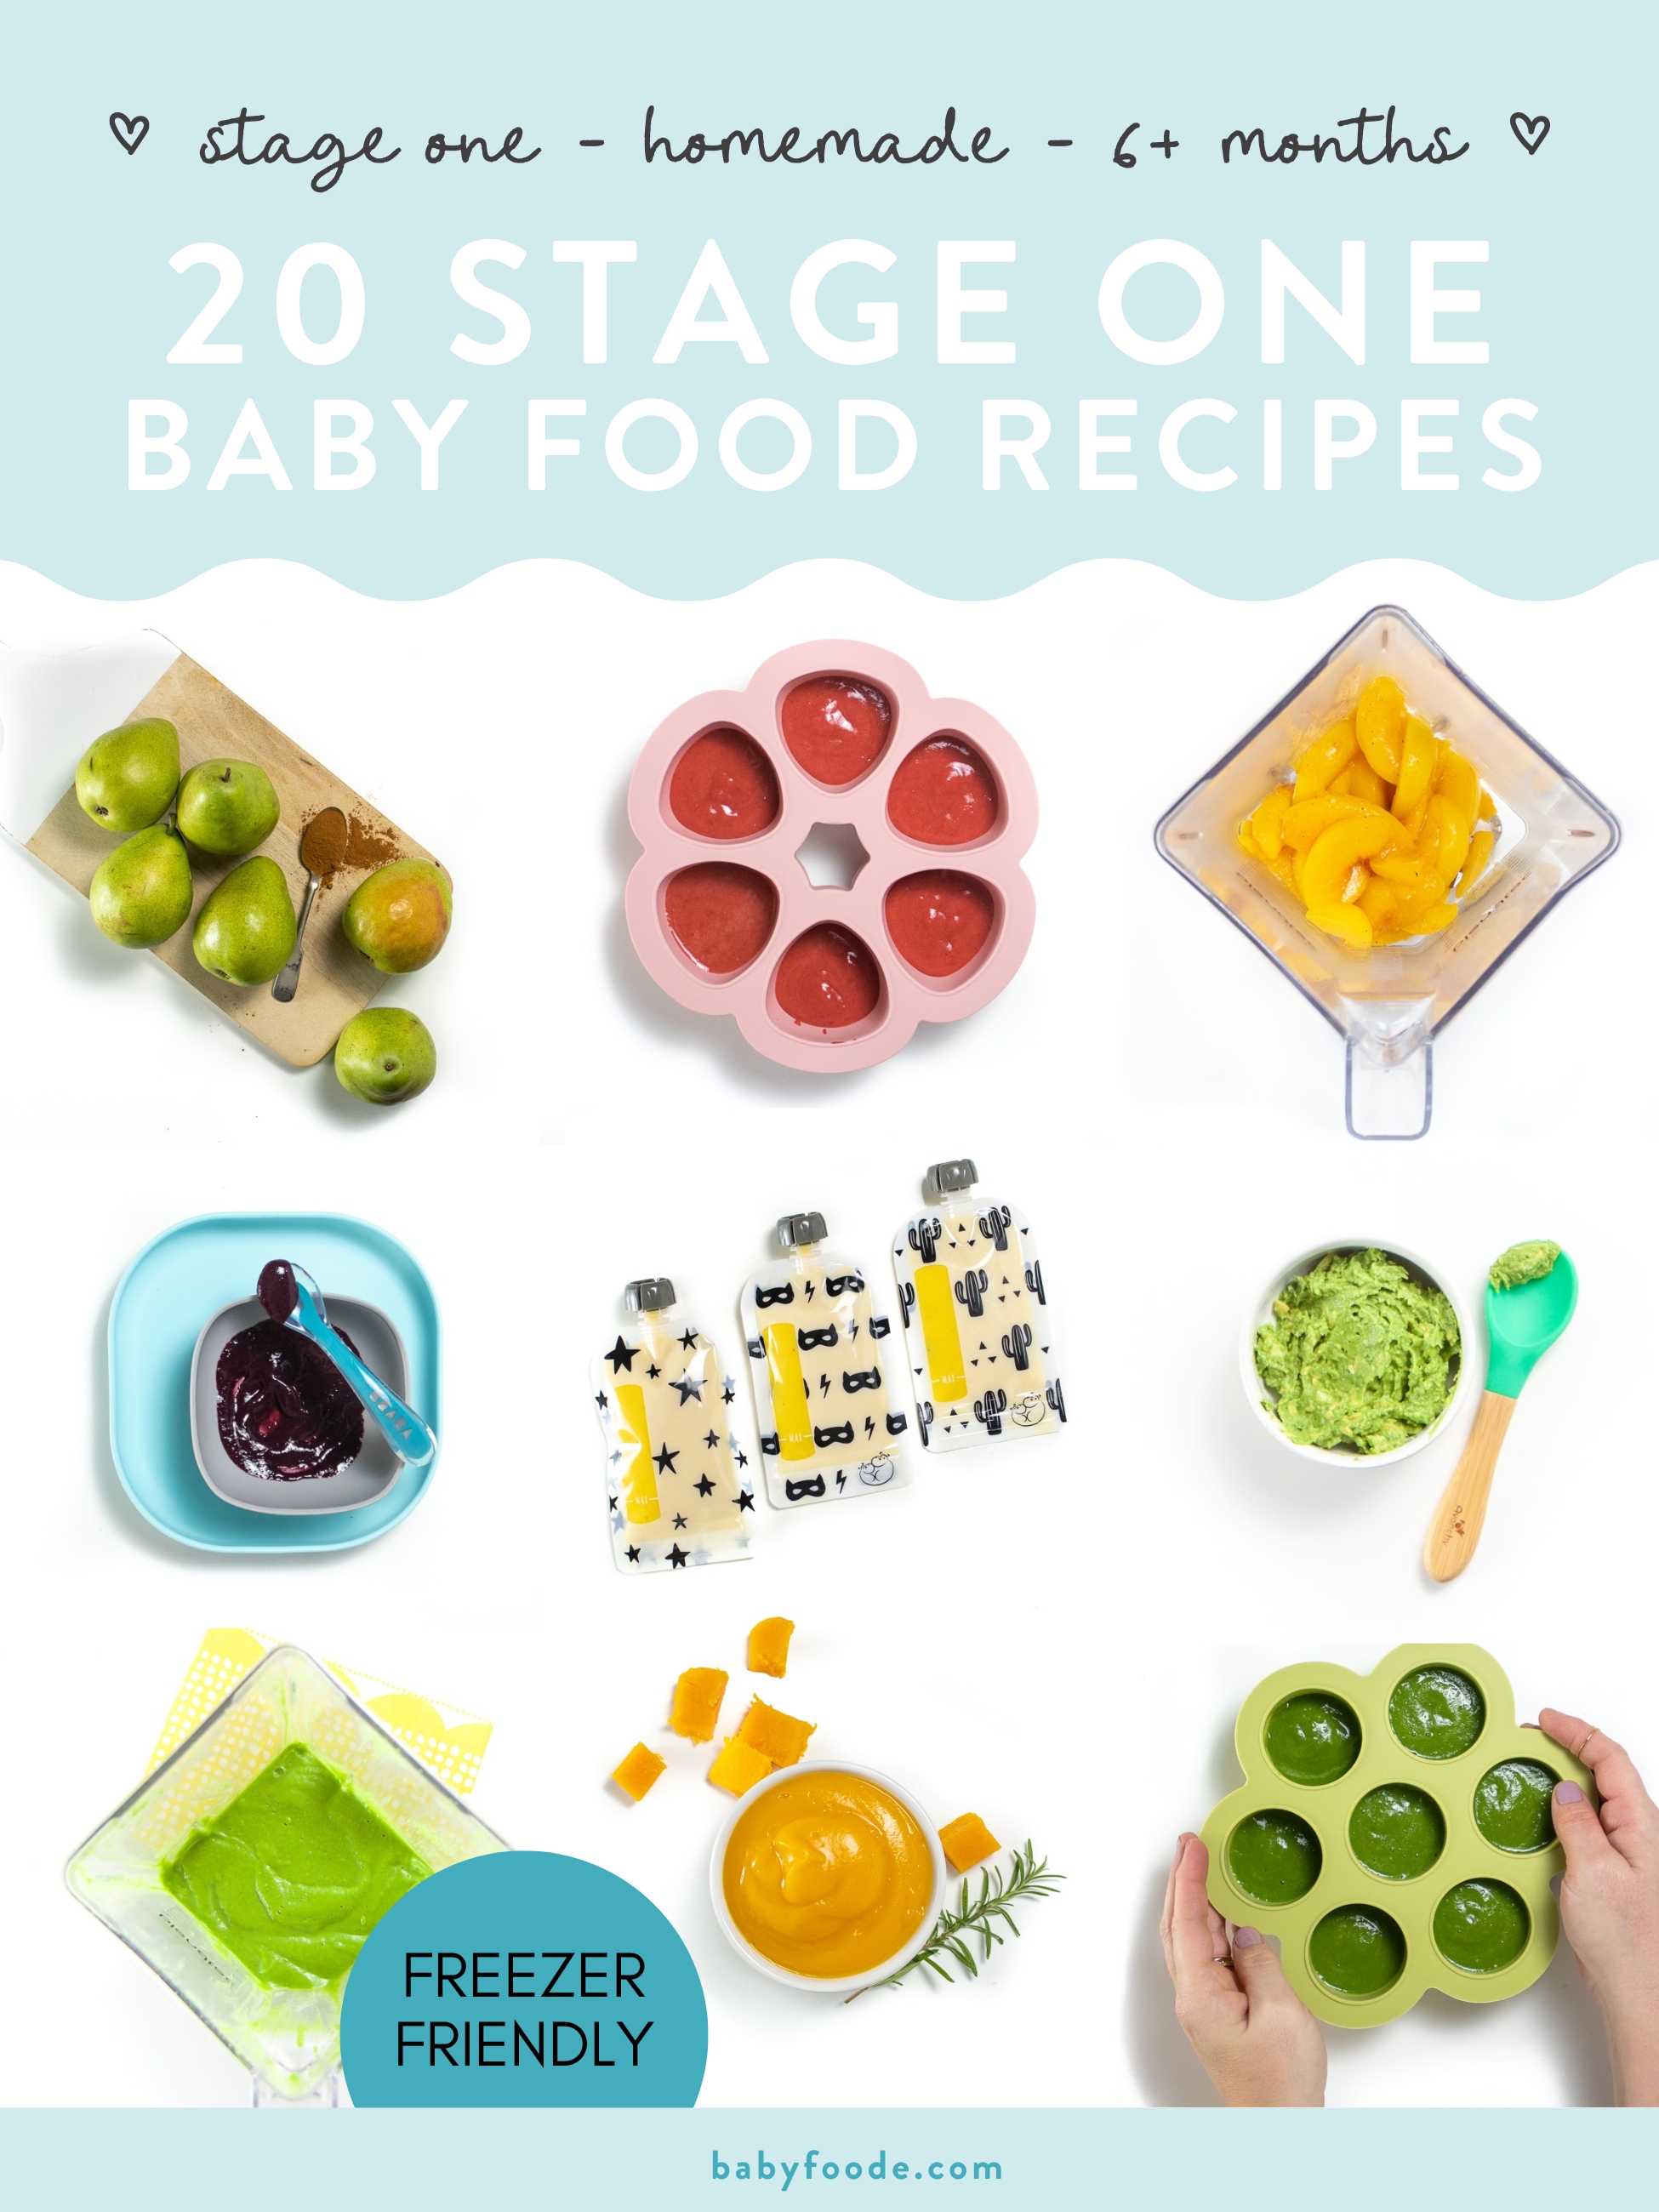 Graphic for post - 20 stage one baby food recipes, homemade, 6+ months, freezer friendly. Images are in a grid showing different stages of making and storing homemade purees for baby.